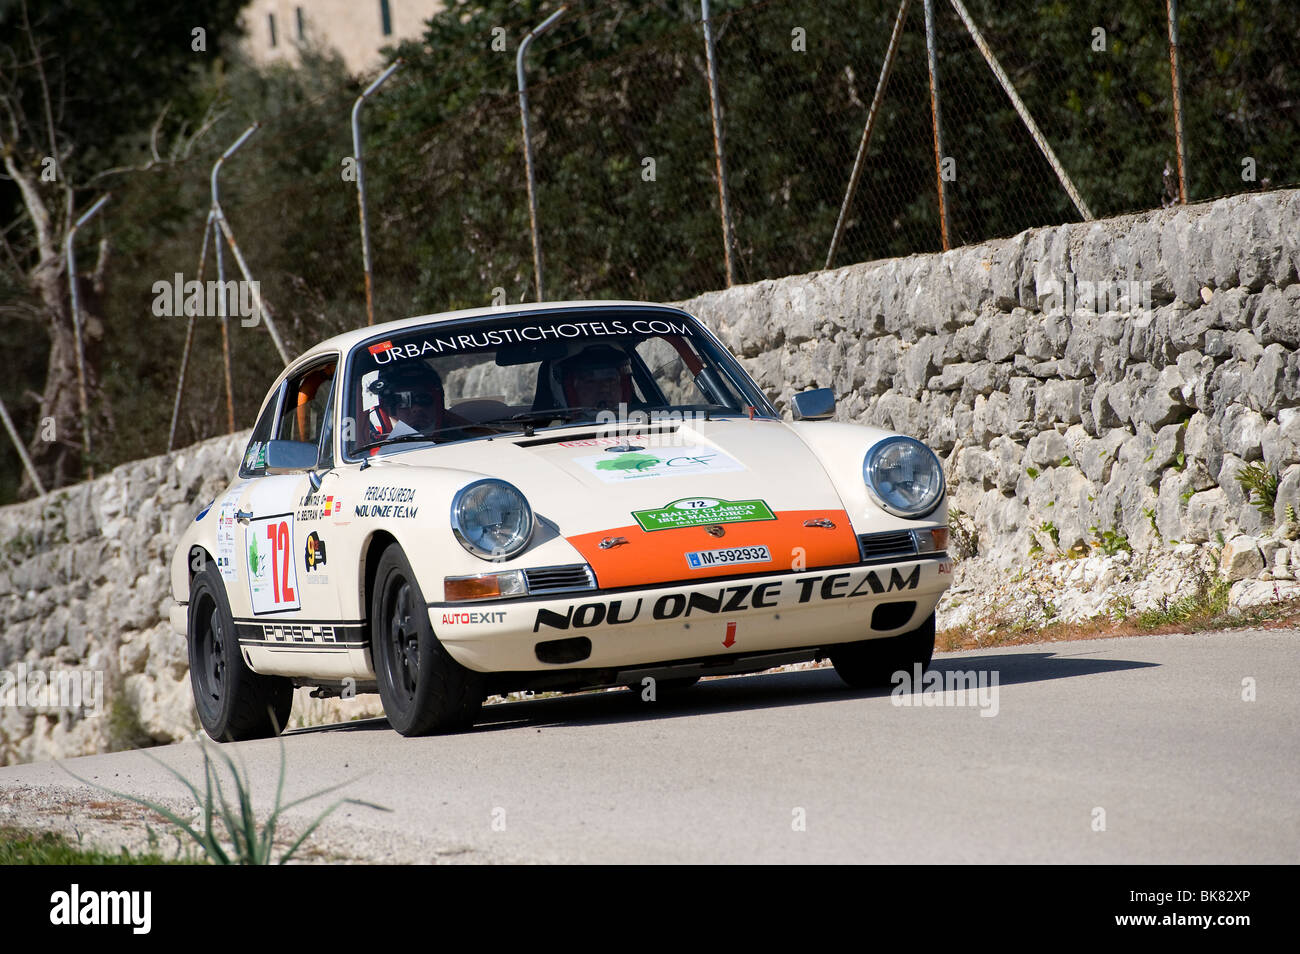 1966 Porsche 911s classic sports car taking part in a rally in Spain. Stock Photo